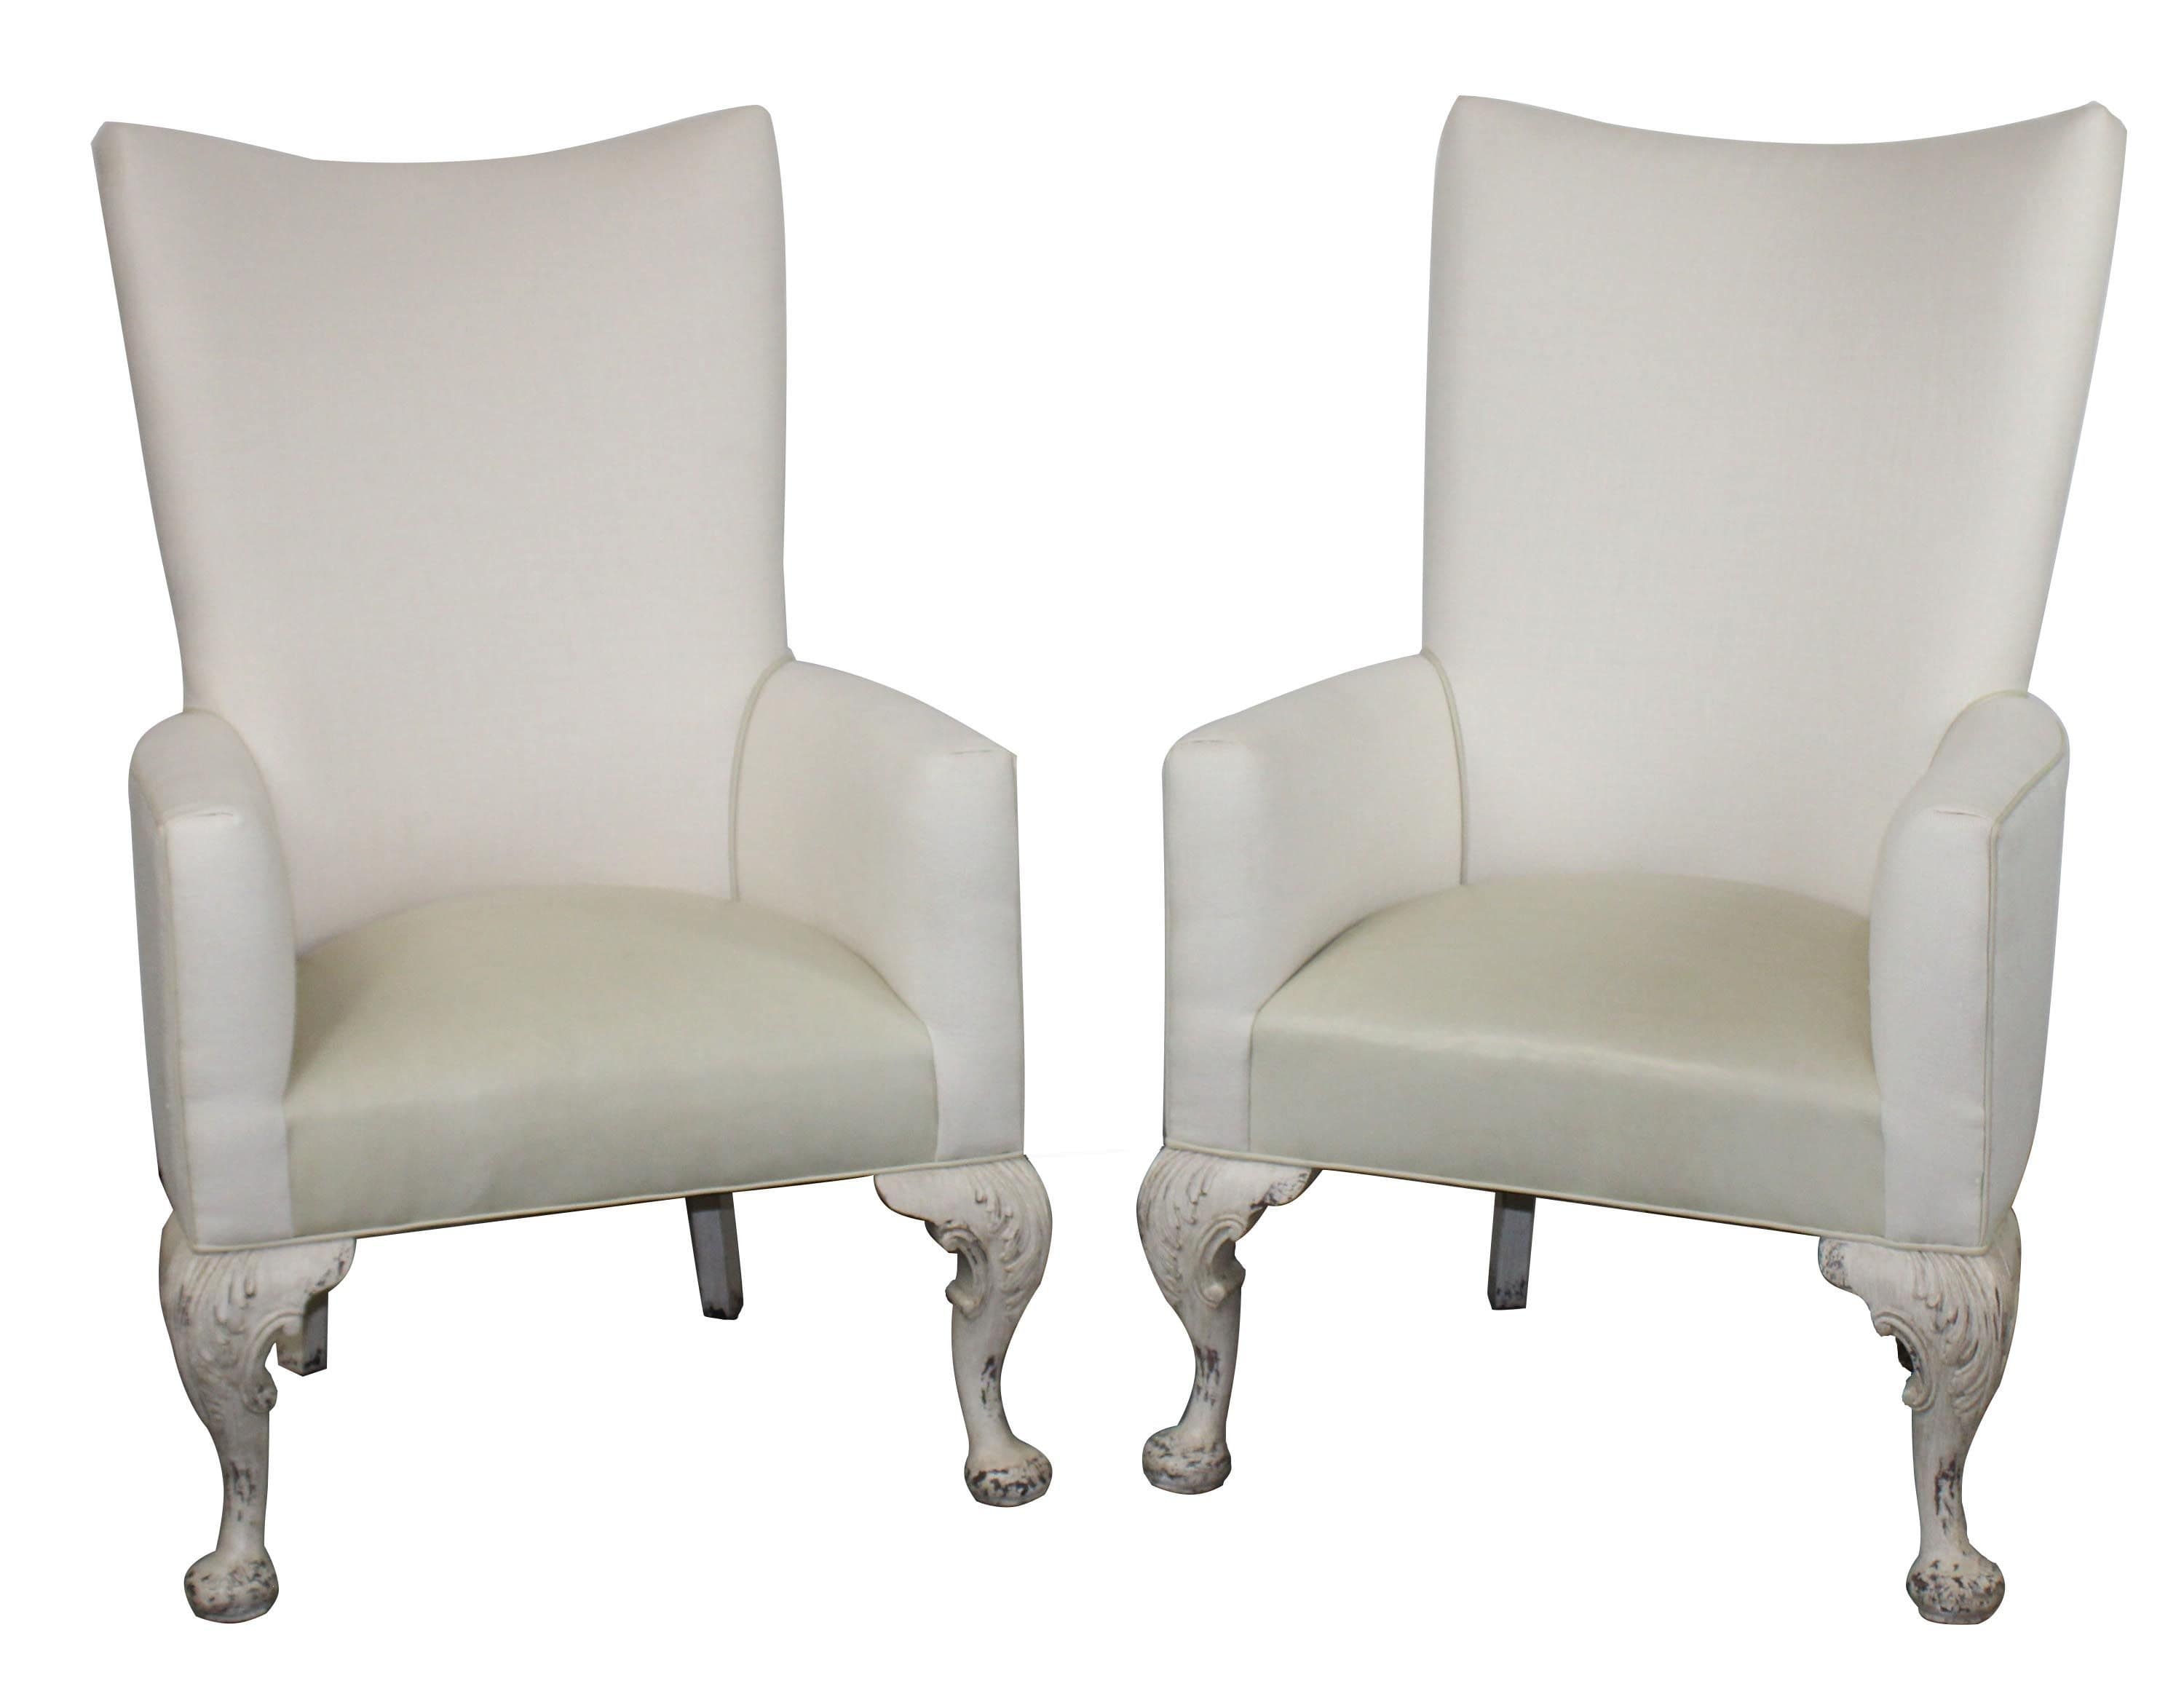 Pair Bungalow Modern club chairs with leather